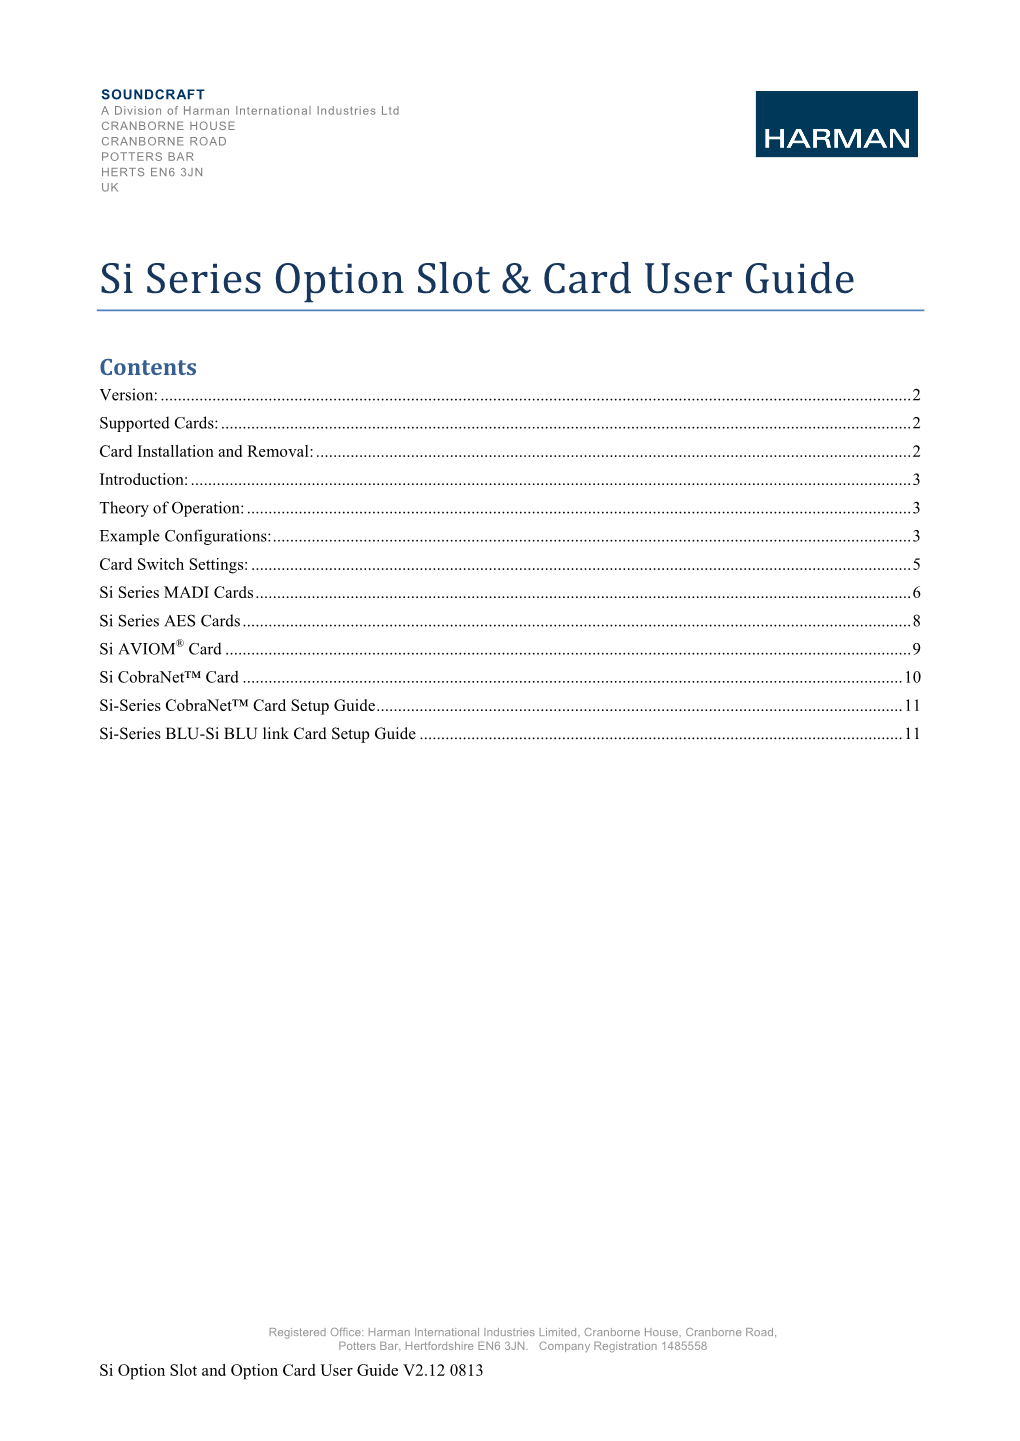 Si Series Option Slot & Card User Guide